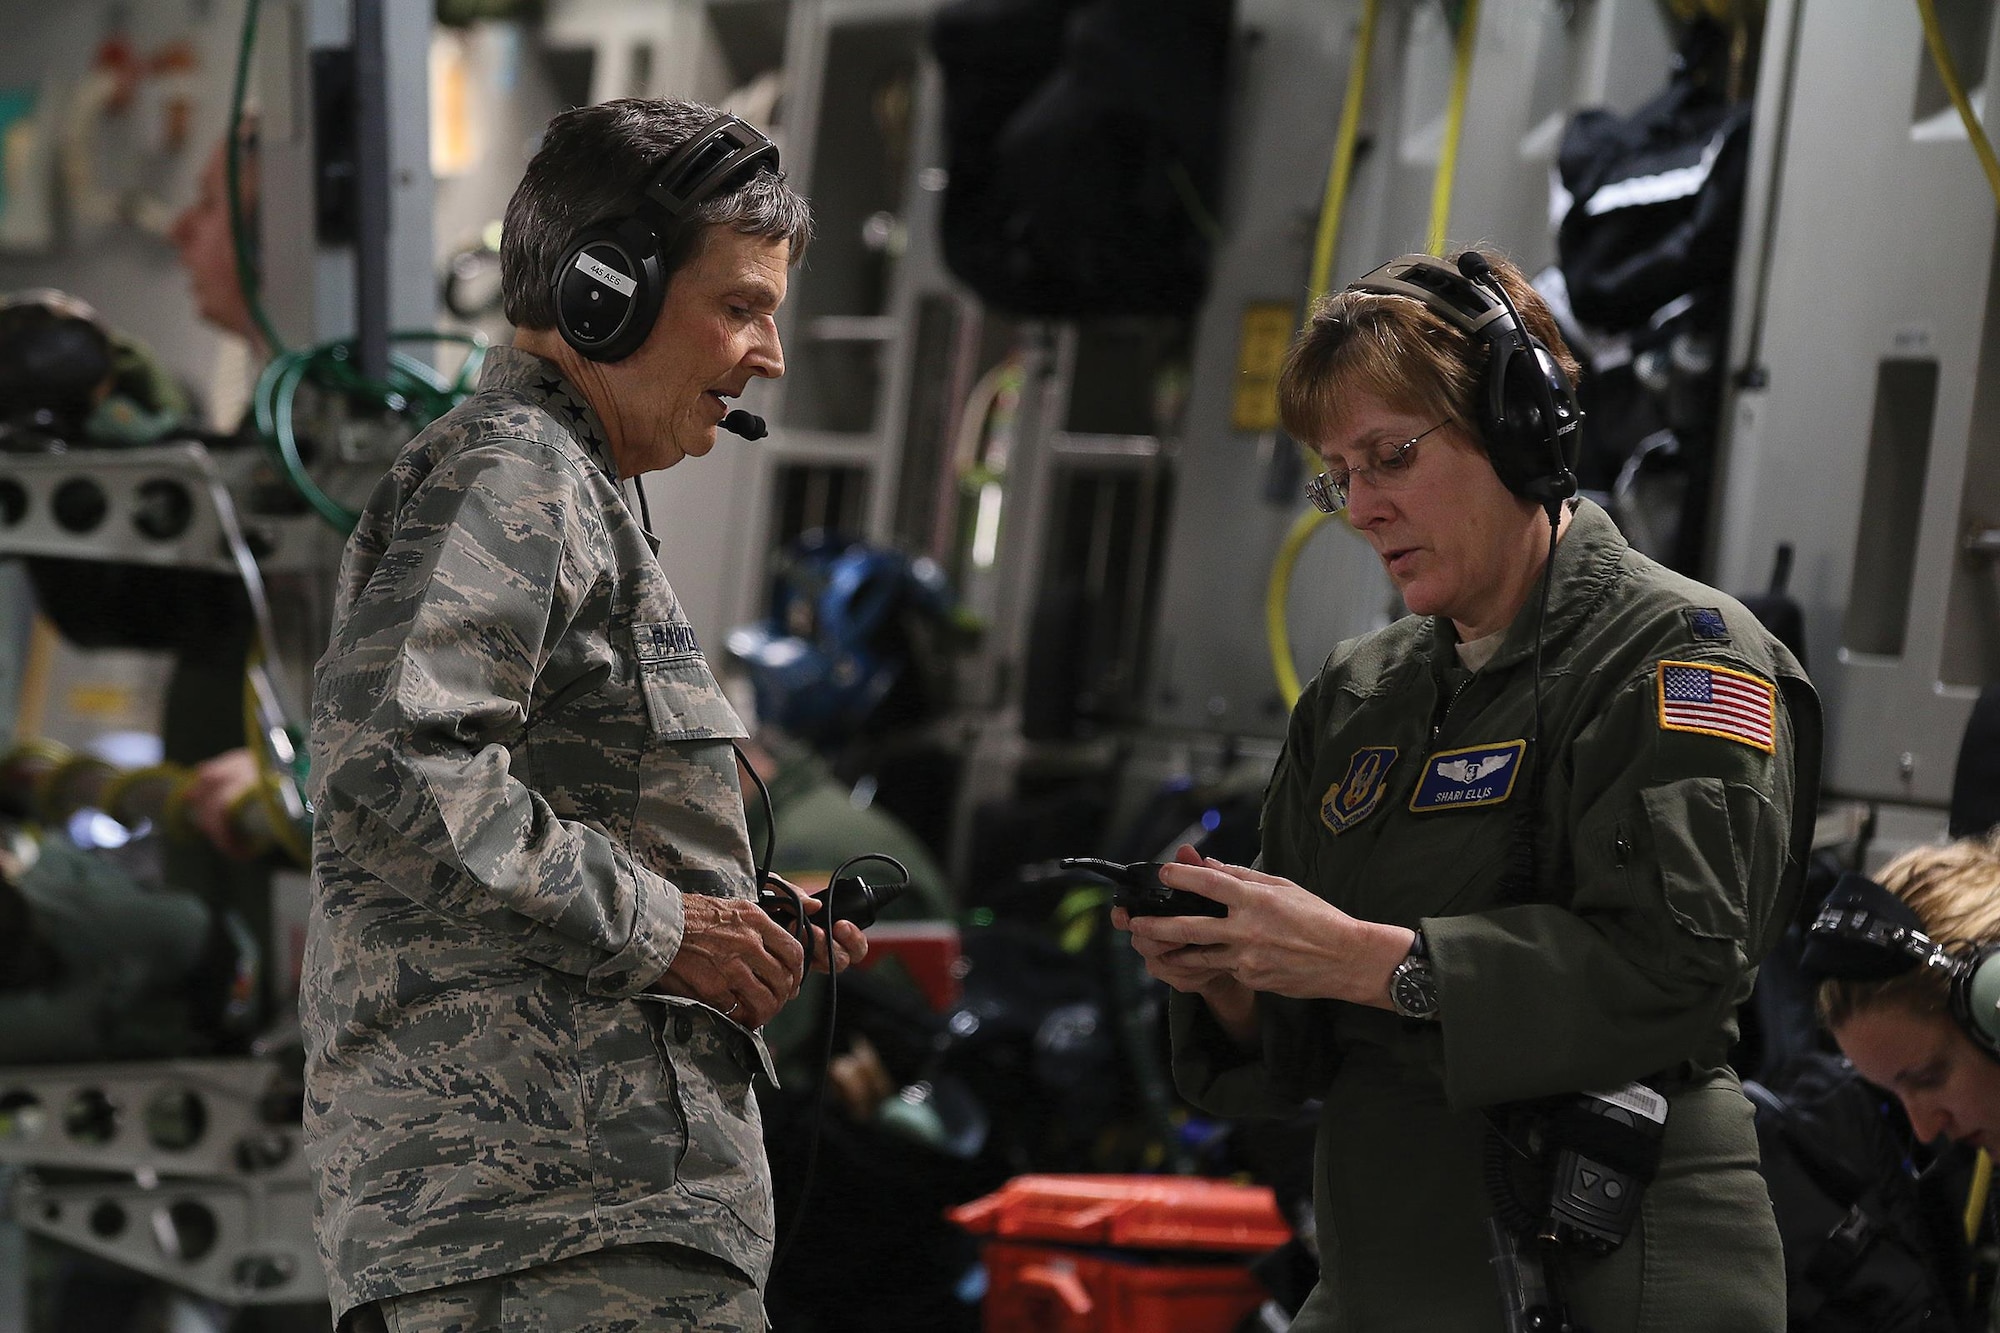 Lt. Col. Shari Ellis, 445th Aeromedical Evacuation Squadron flight nurse, shows Gen. Ellen Pawlikowski, Commander, Air Force Materiel Command, equipment AES Airmen use to communicate with each other during various missions they fly on. The general flew onboard a 445th Airlift Wing C-17 Globemaster III used for an aeromedical evacuation training flight June 20, 2017. (U.S. Air Force photo/Tech. Sgt. Patrick O’Reilly)